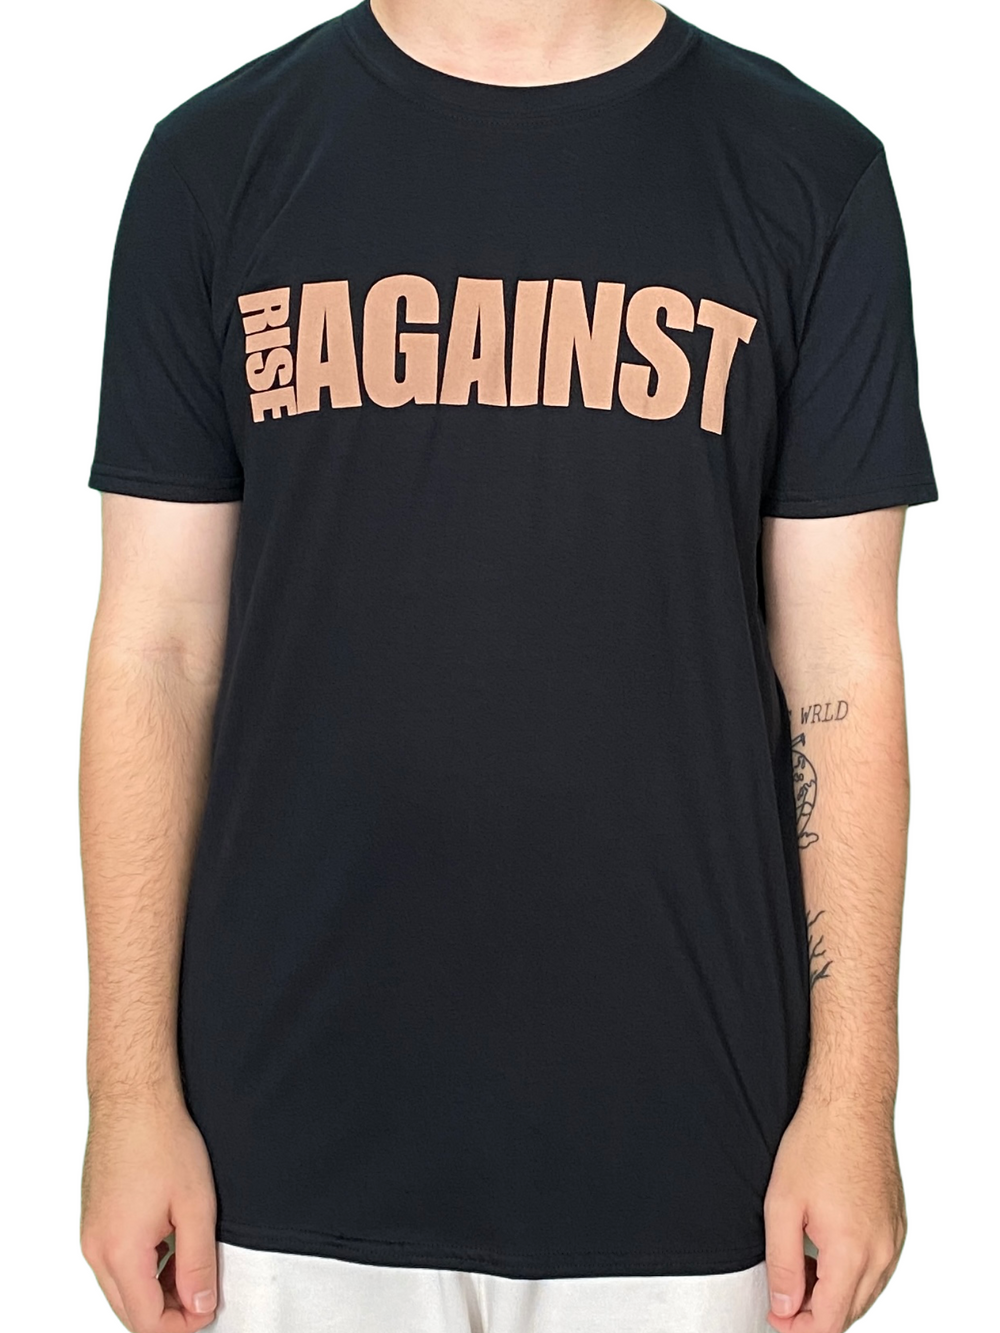 Rise Against Name Unisex Official T Shirt Brand New Various Sizes